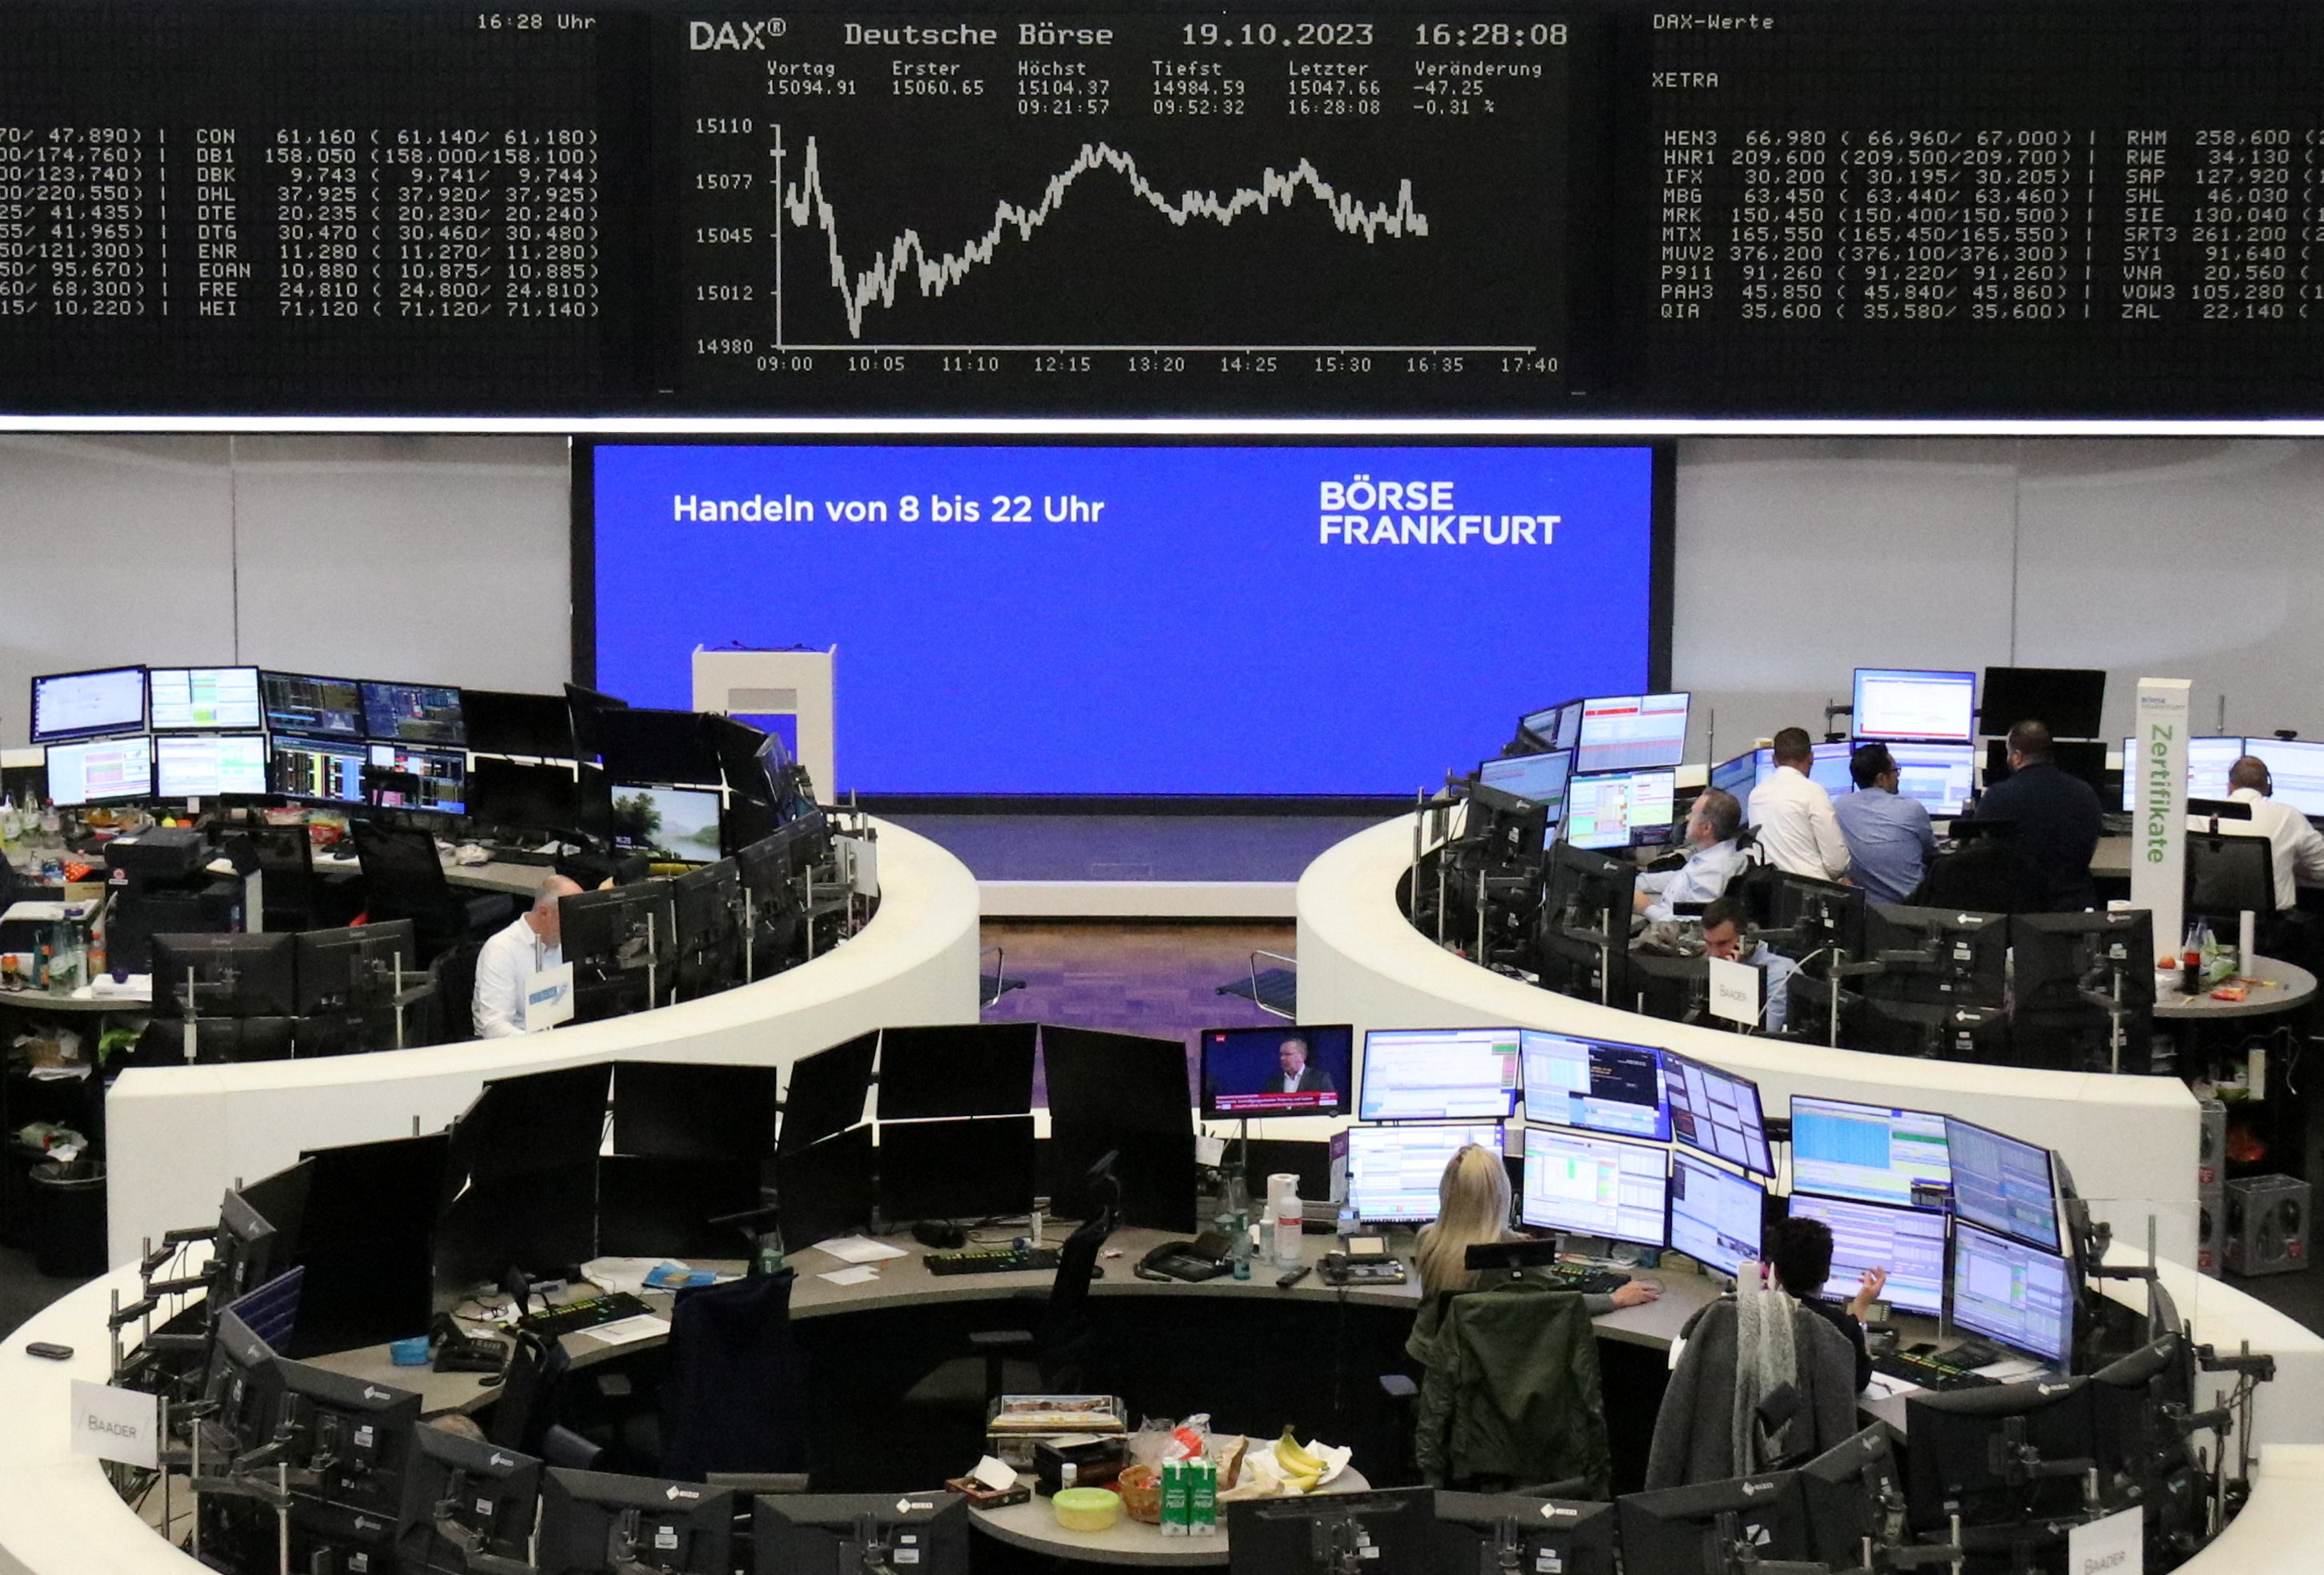 European shares hit near 22-month highs on luxury boost